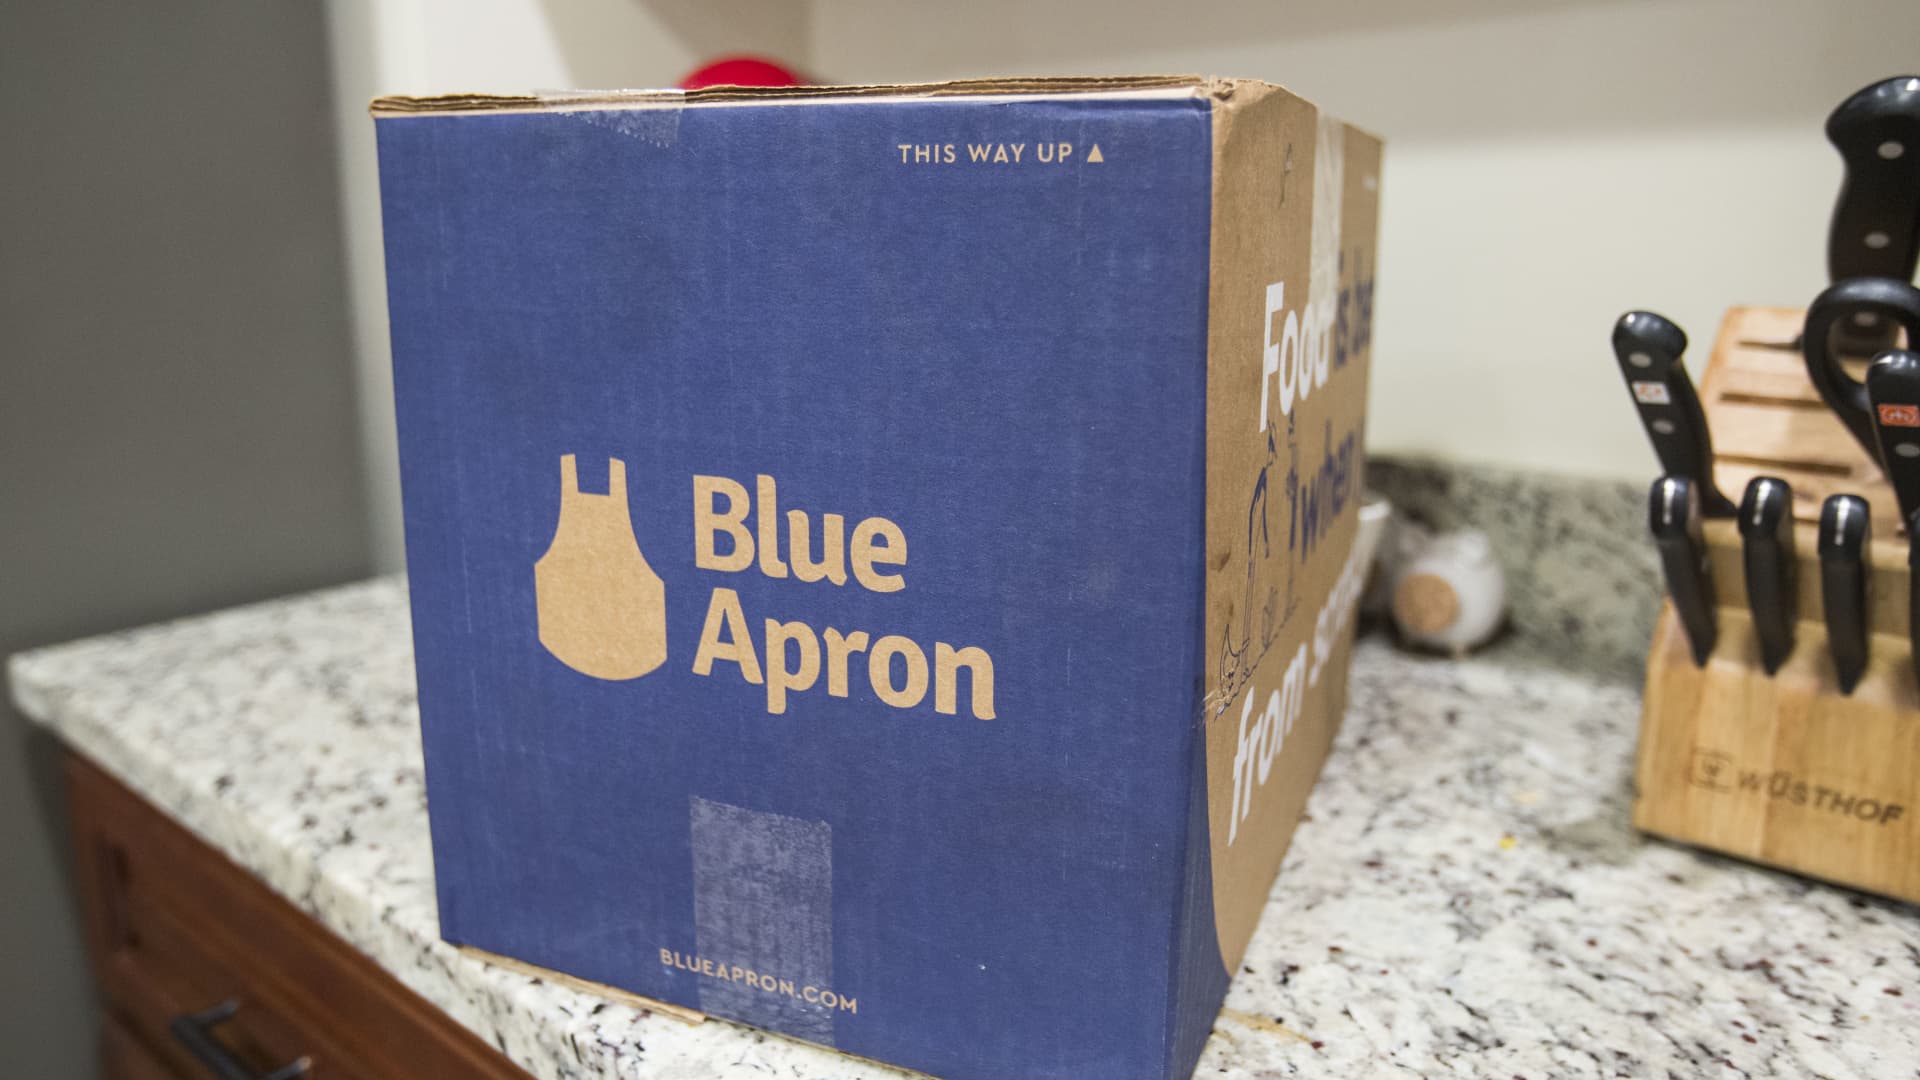 Blue Apron to be acquired by Wonder Group for $103 million